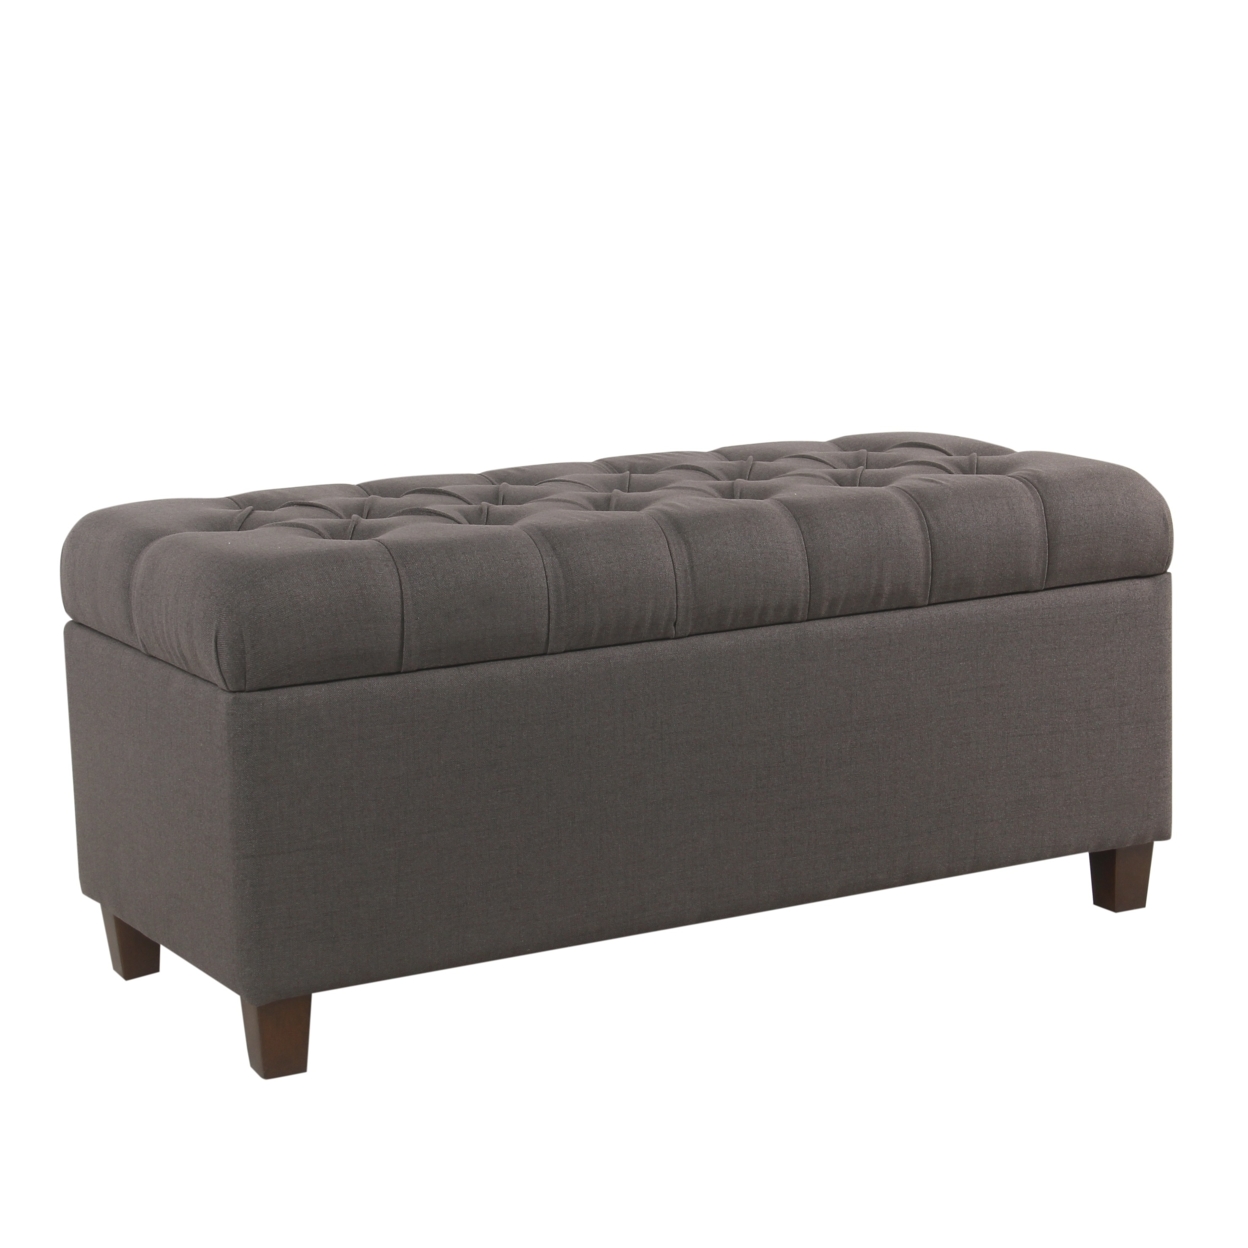 Fabric Upholstered Button Tufted Wooden Bench With Hinged Storage, Dark Gray And Brown- Saltoro Sherpi